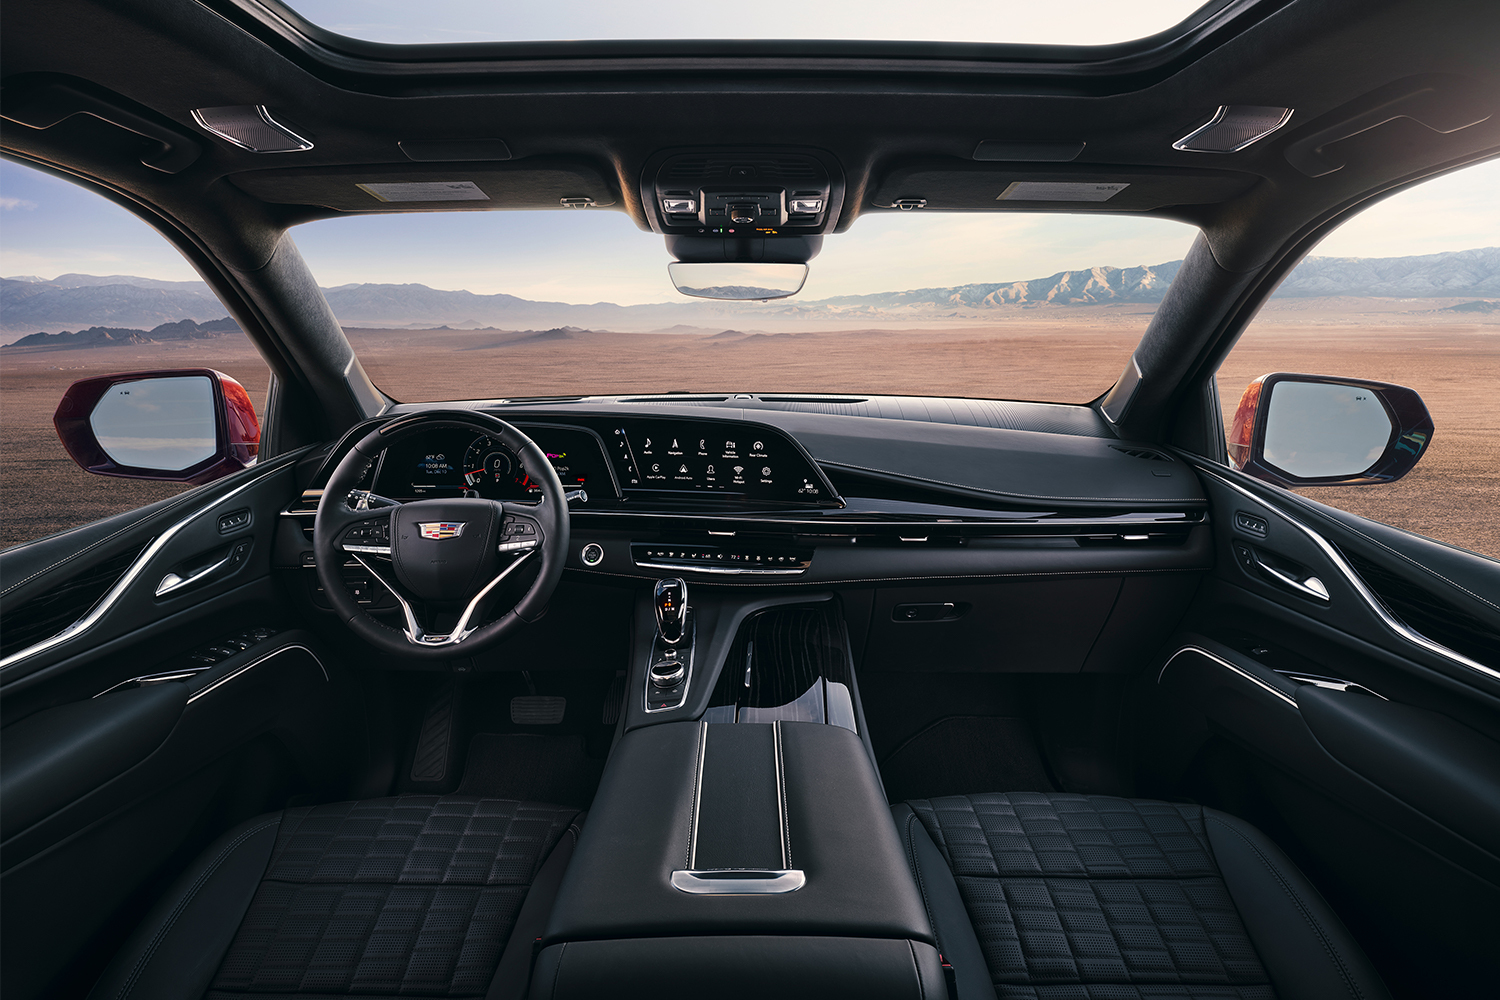 The generous interior of the 2023 Cadillac Escalade-V, showing the two front seats and dashboard